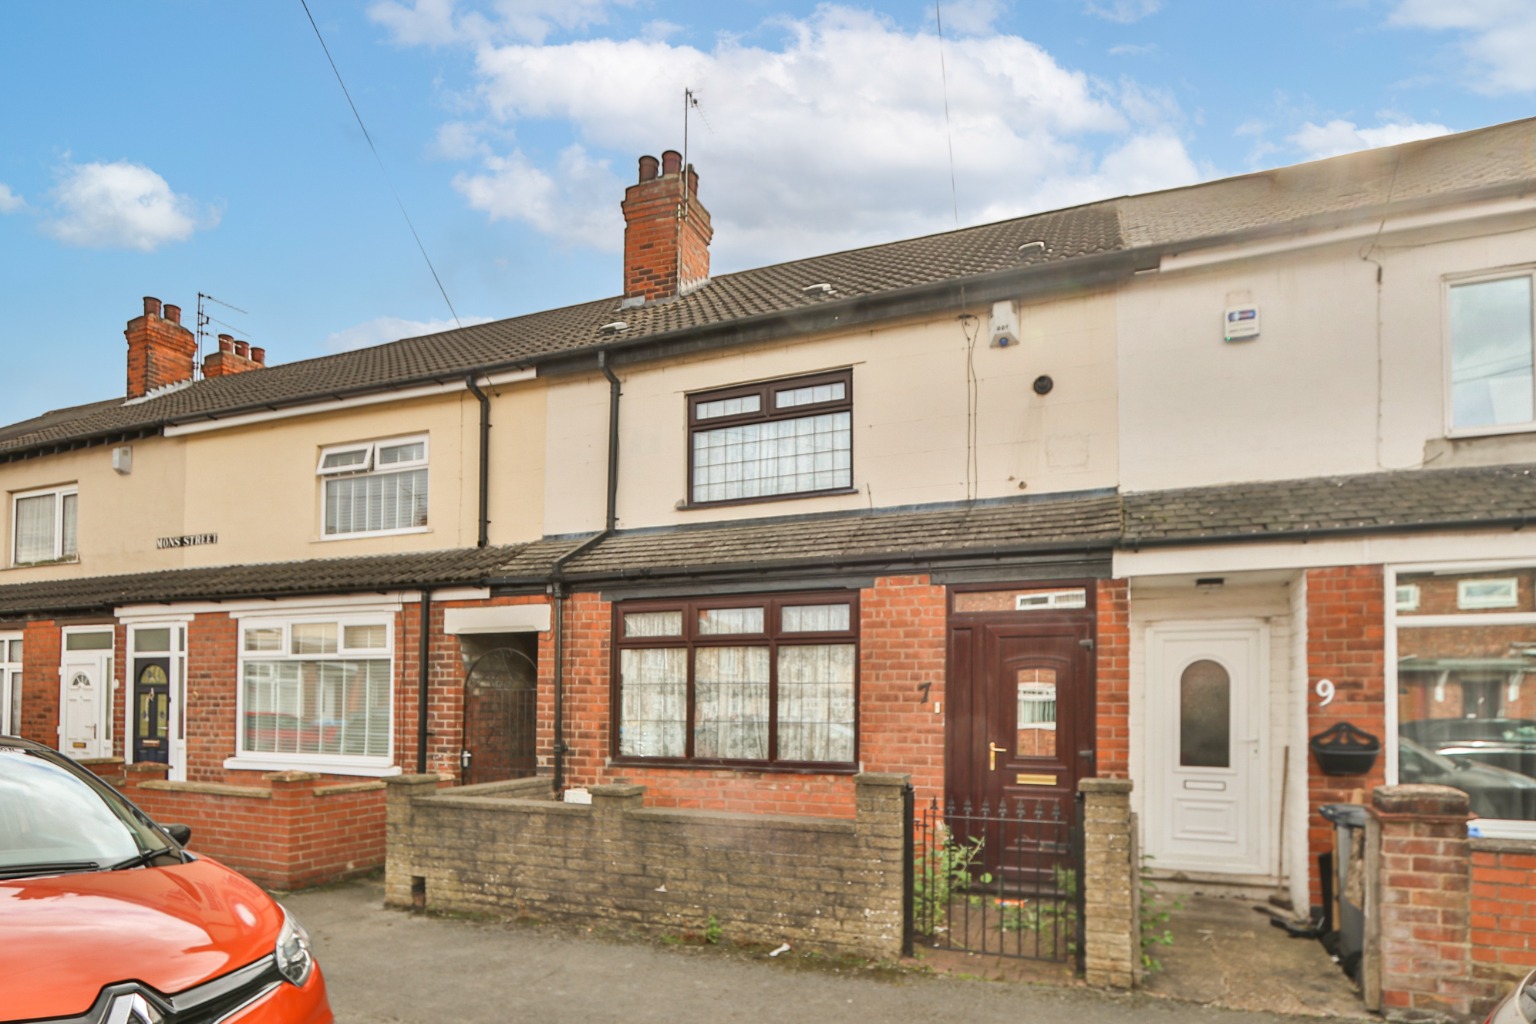 2 bed terraced house for sale - Property Image 1